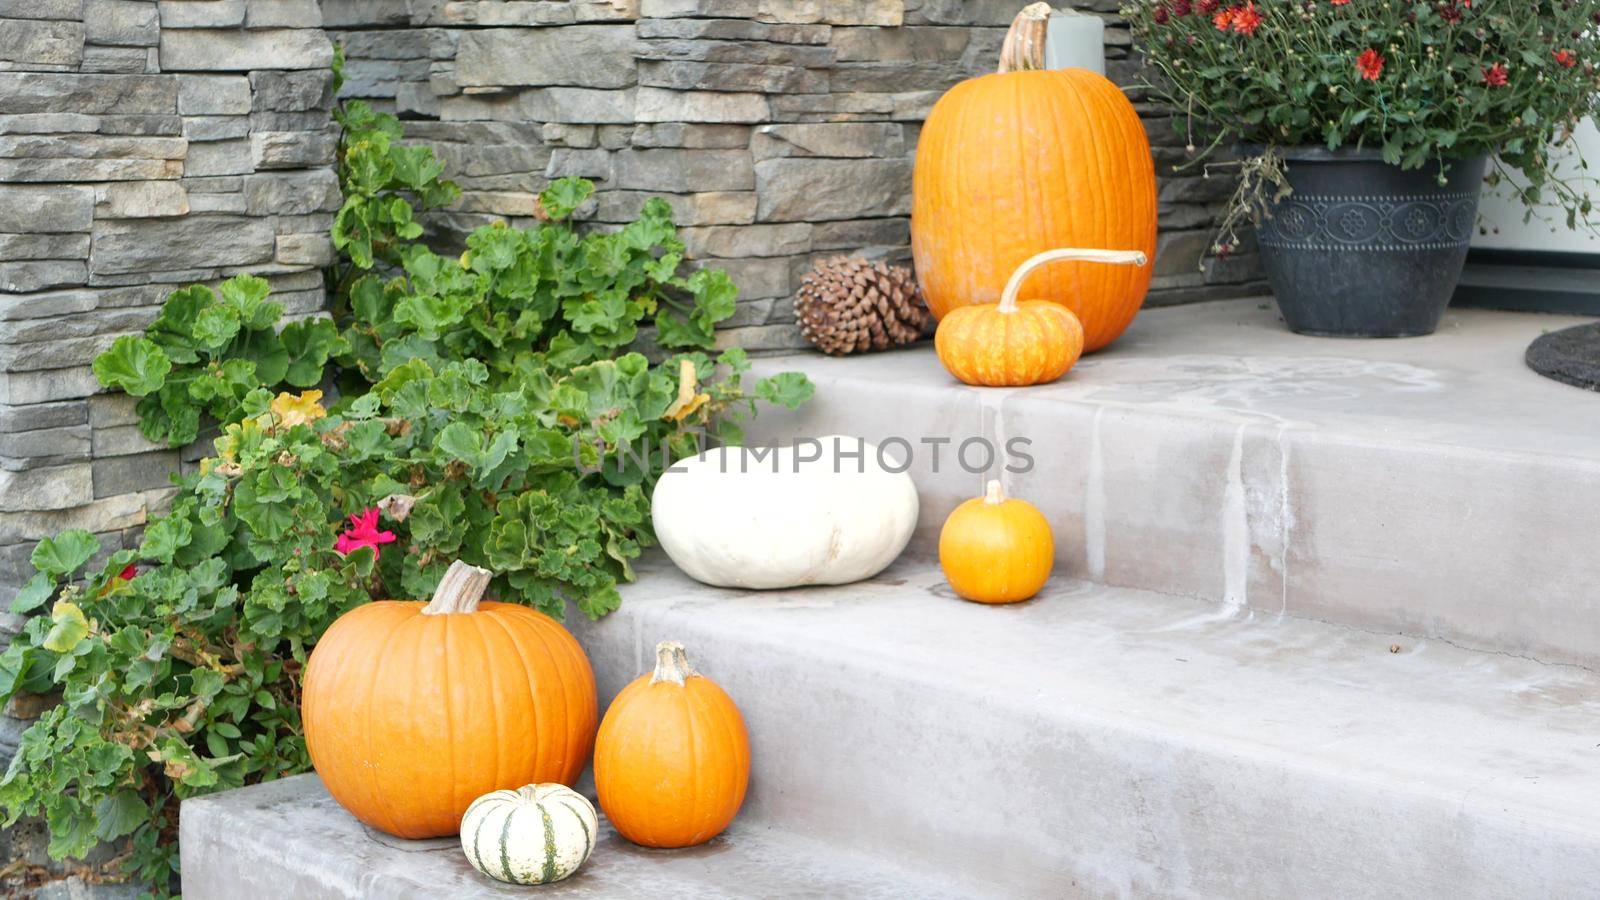 LOS ANGELES, CALIFORNIA, USA - 29 OCT 2019: Scary festival decorations of a house, Happy Halloween holiday. Doorway stairs with jack-o-lantern pumpkin. Traditional party decor. American culture.